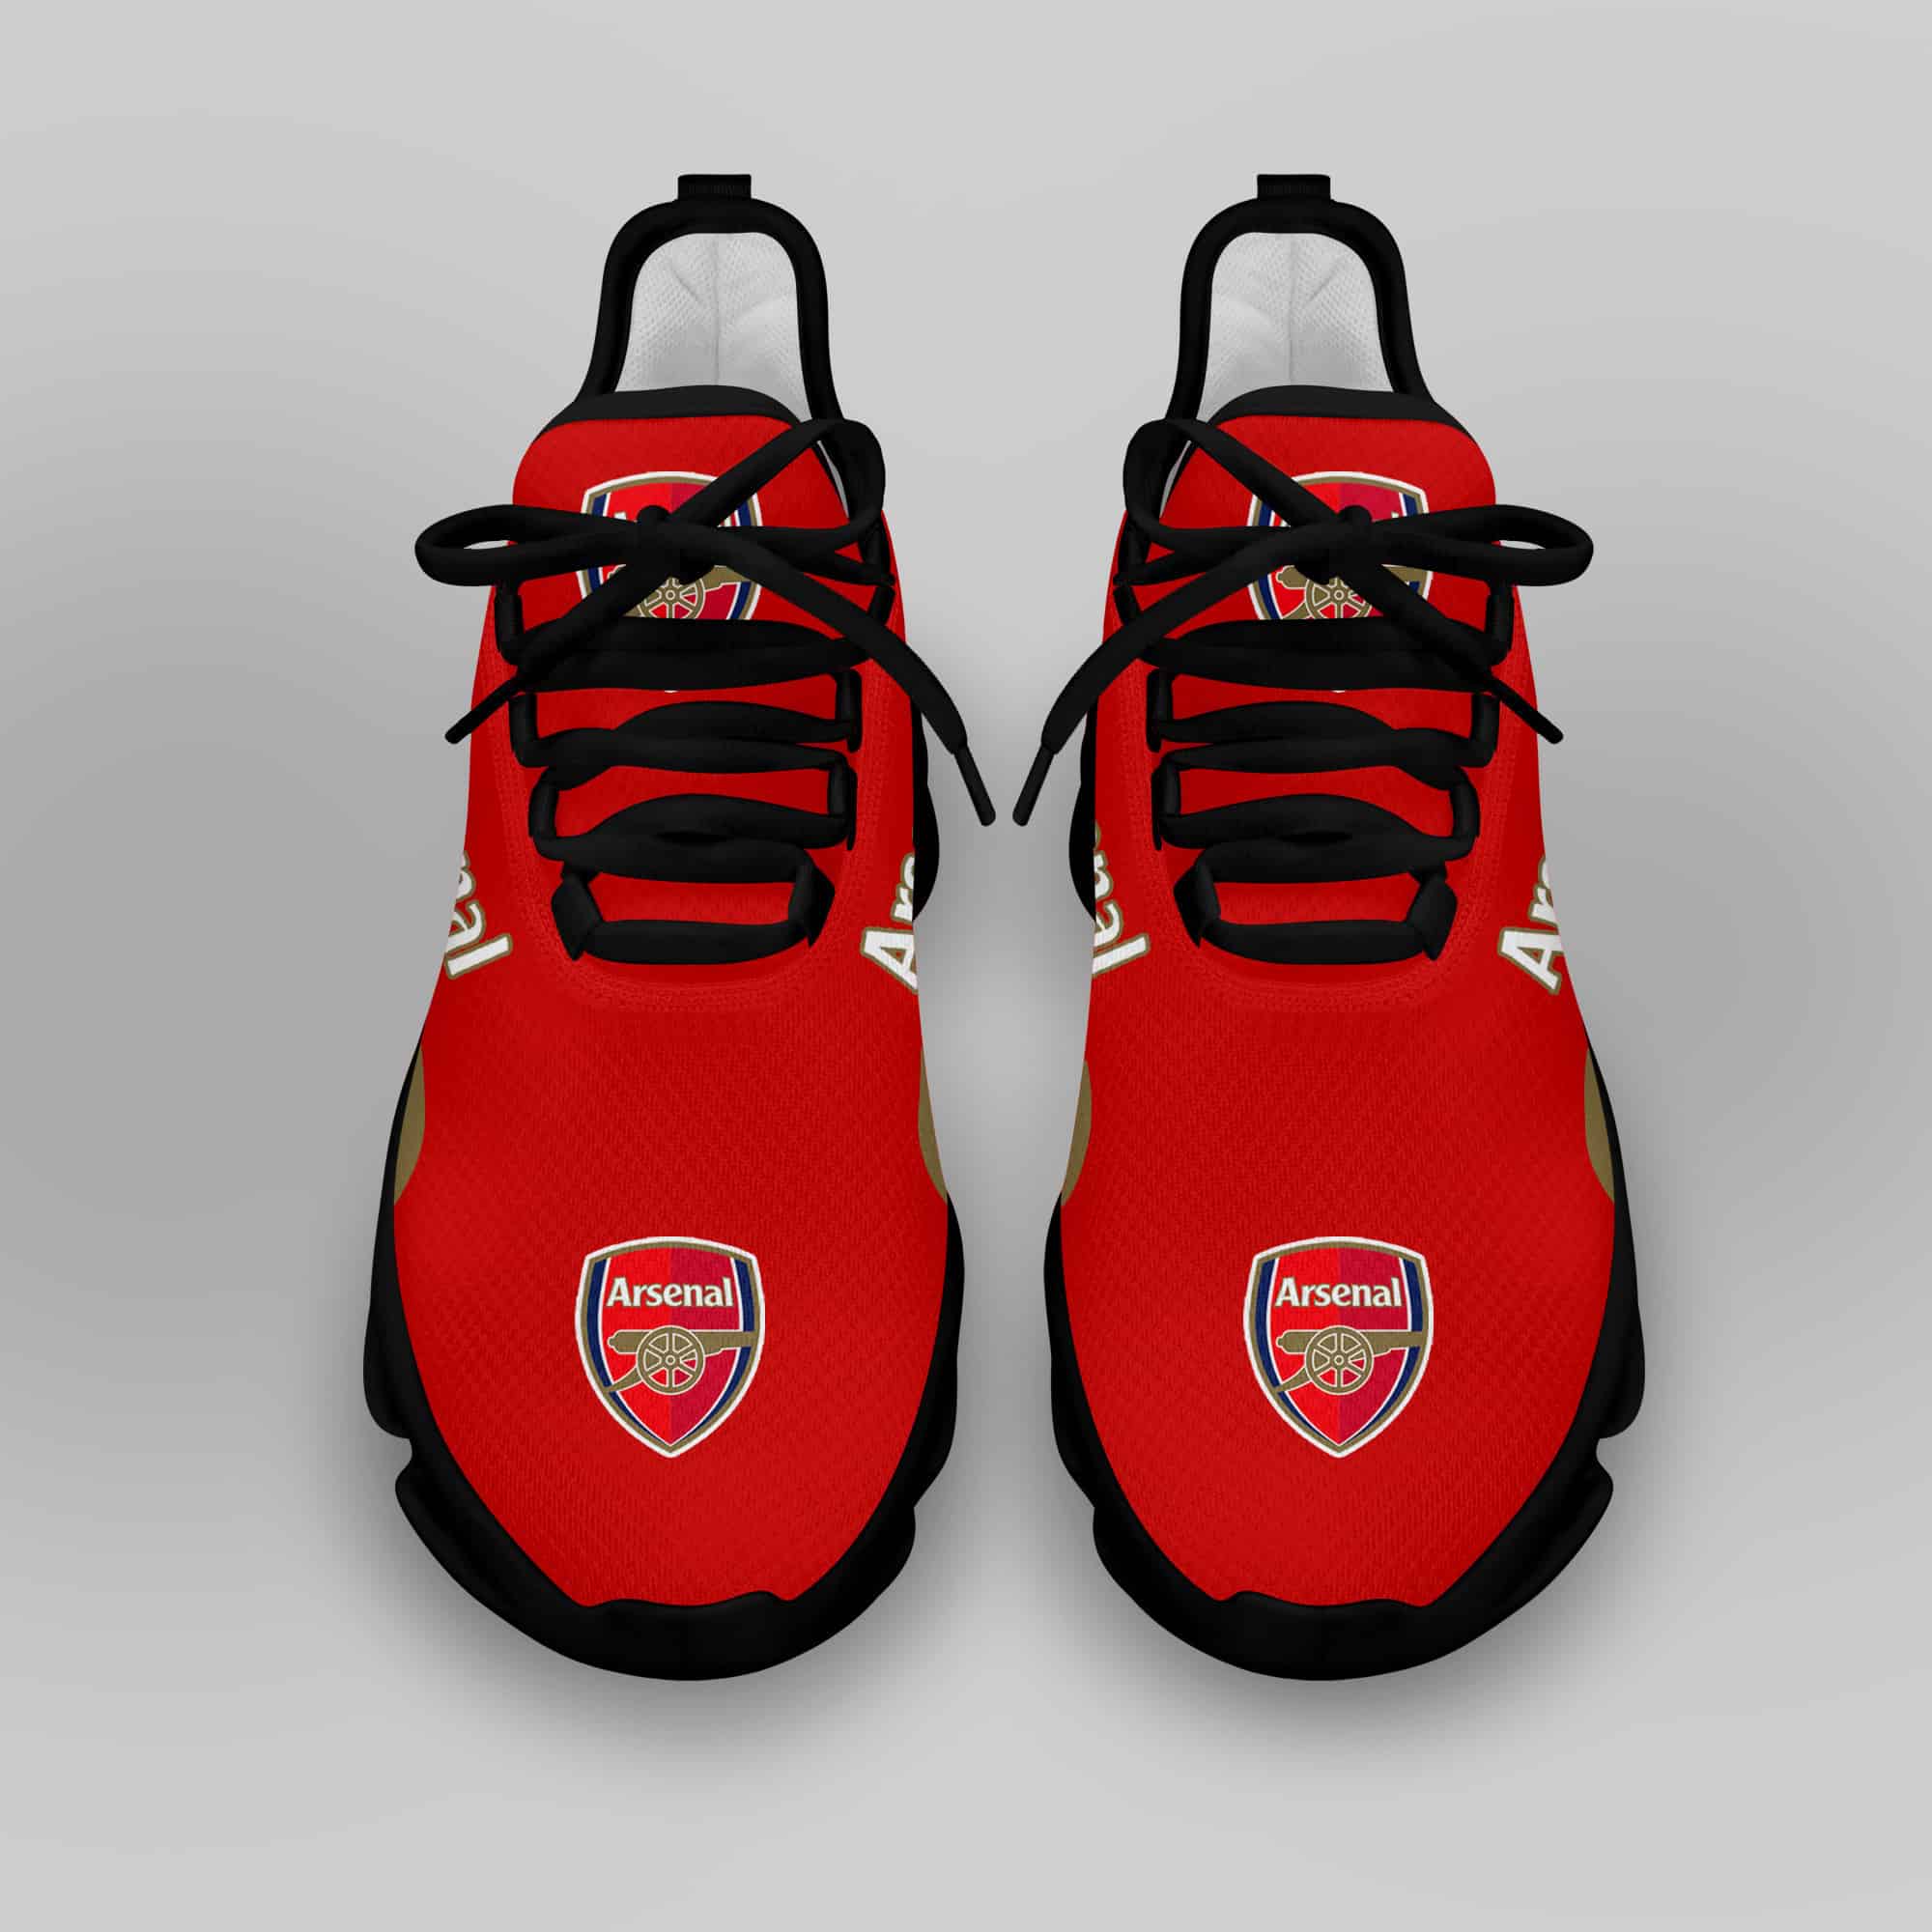 Arsenal Running Shoes Max Soul Shoes Sneakers Ver 4 4